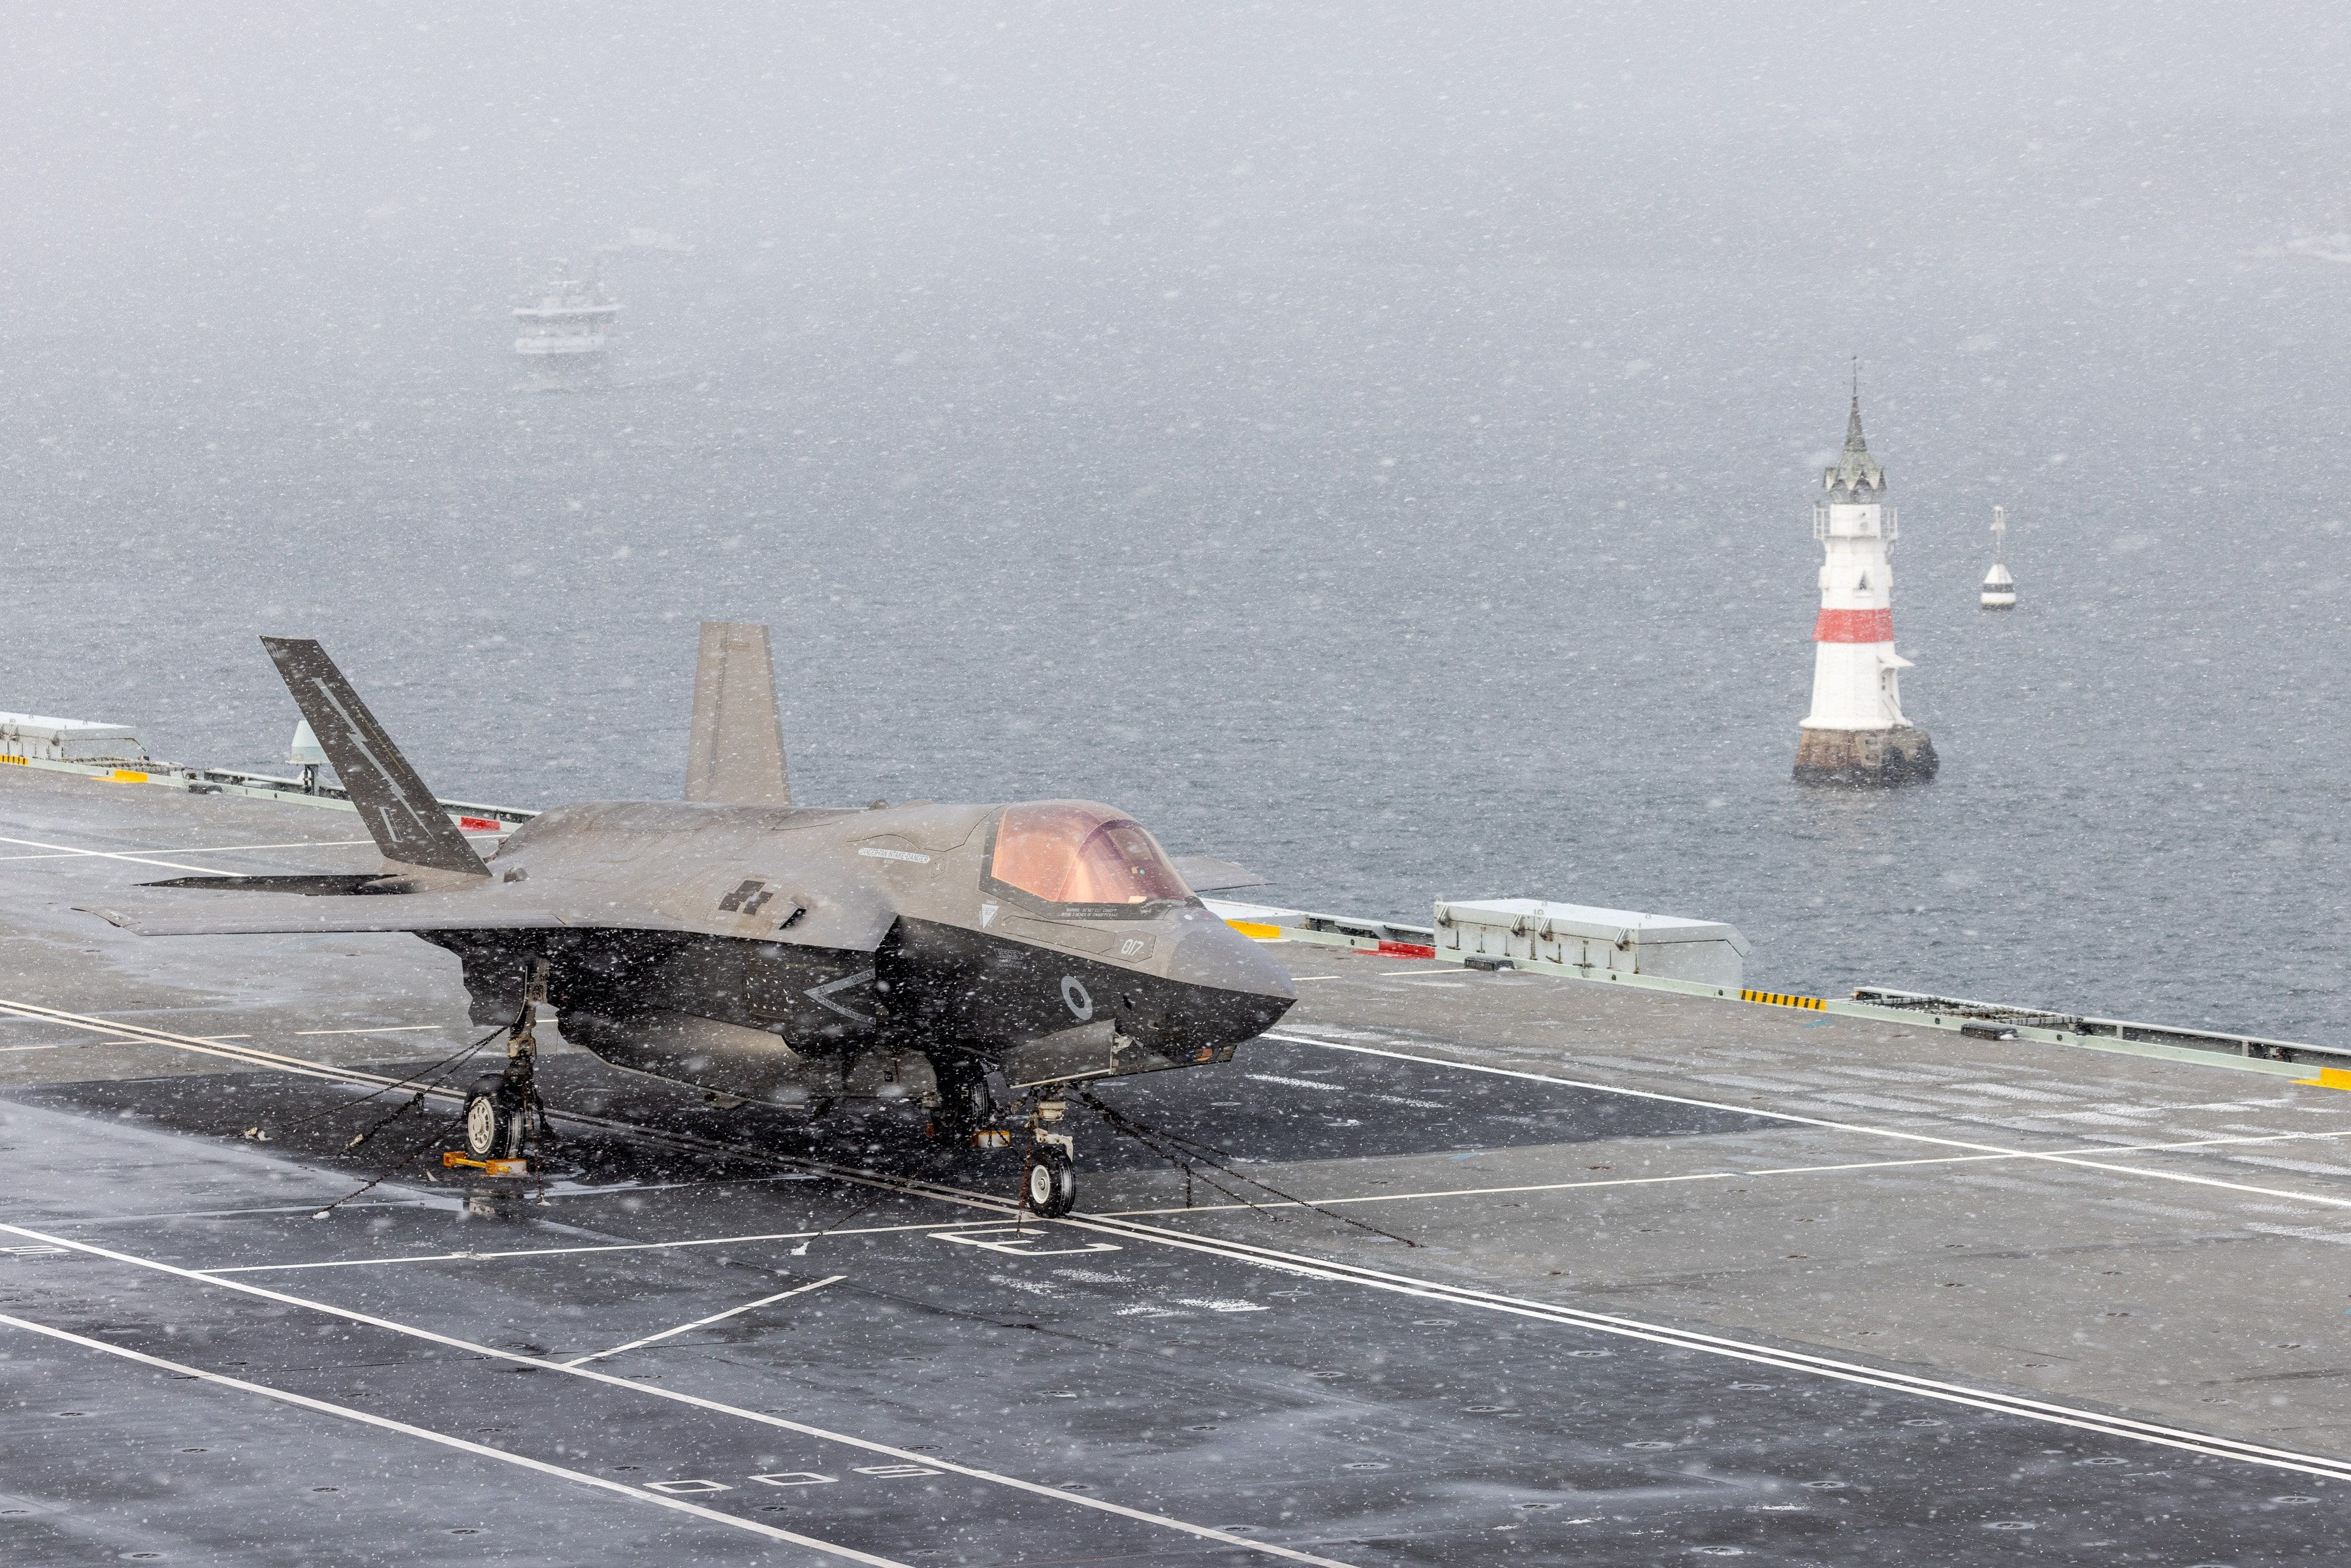 F-35B anchored on aircraft carrier in snow